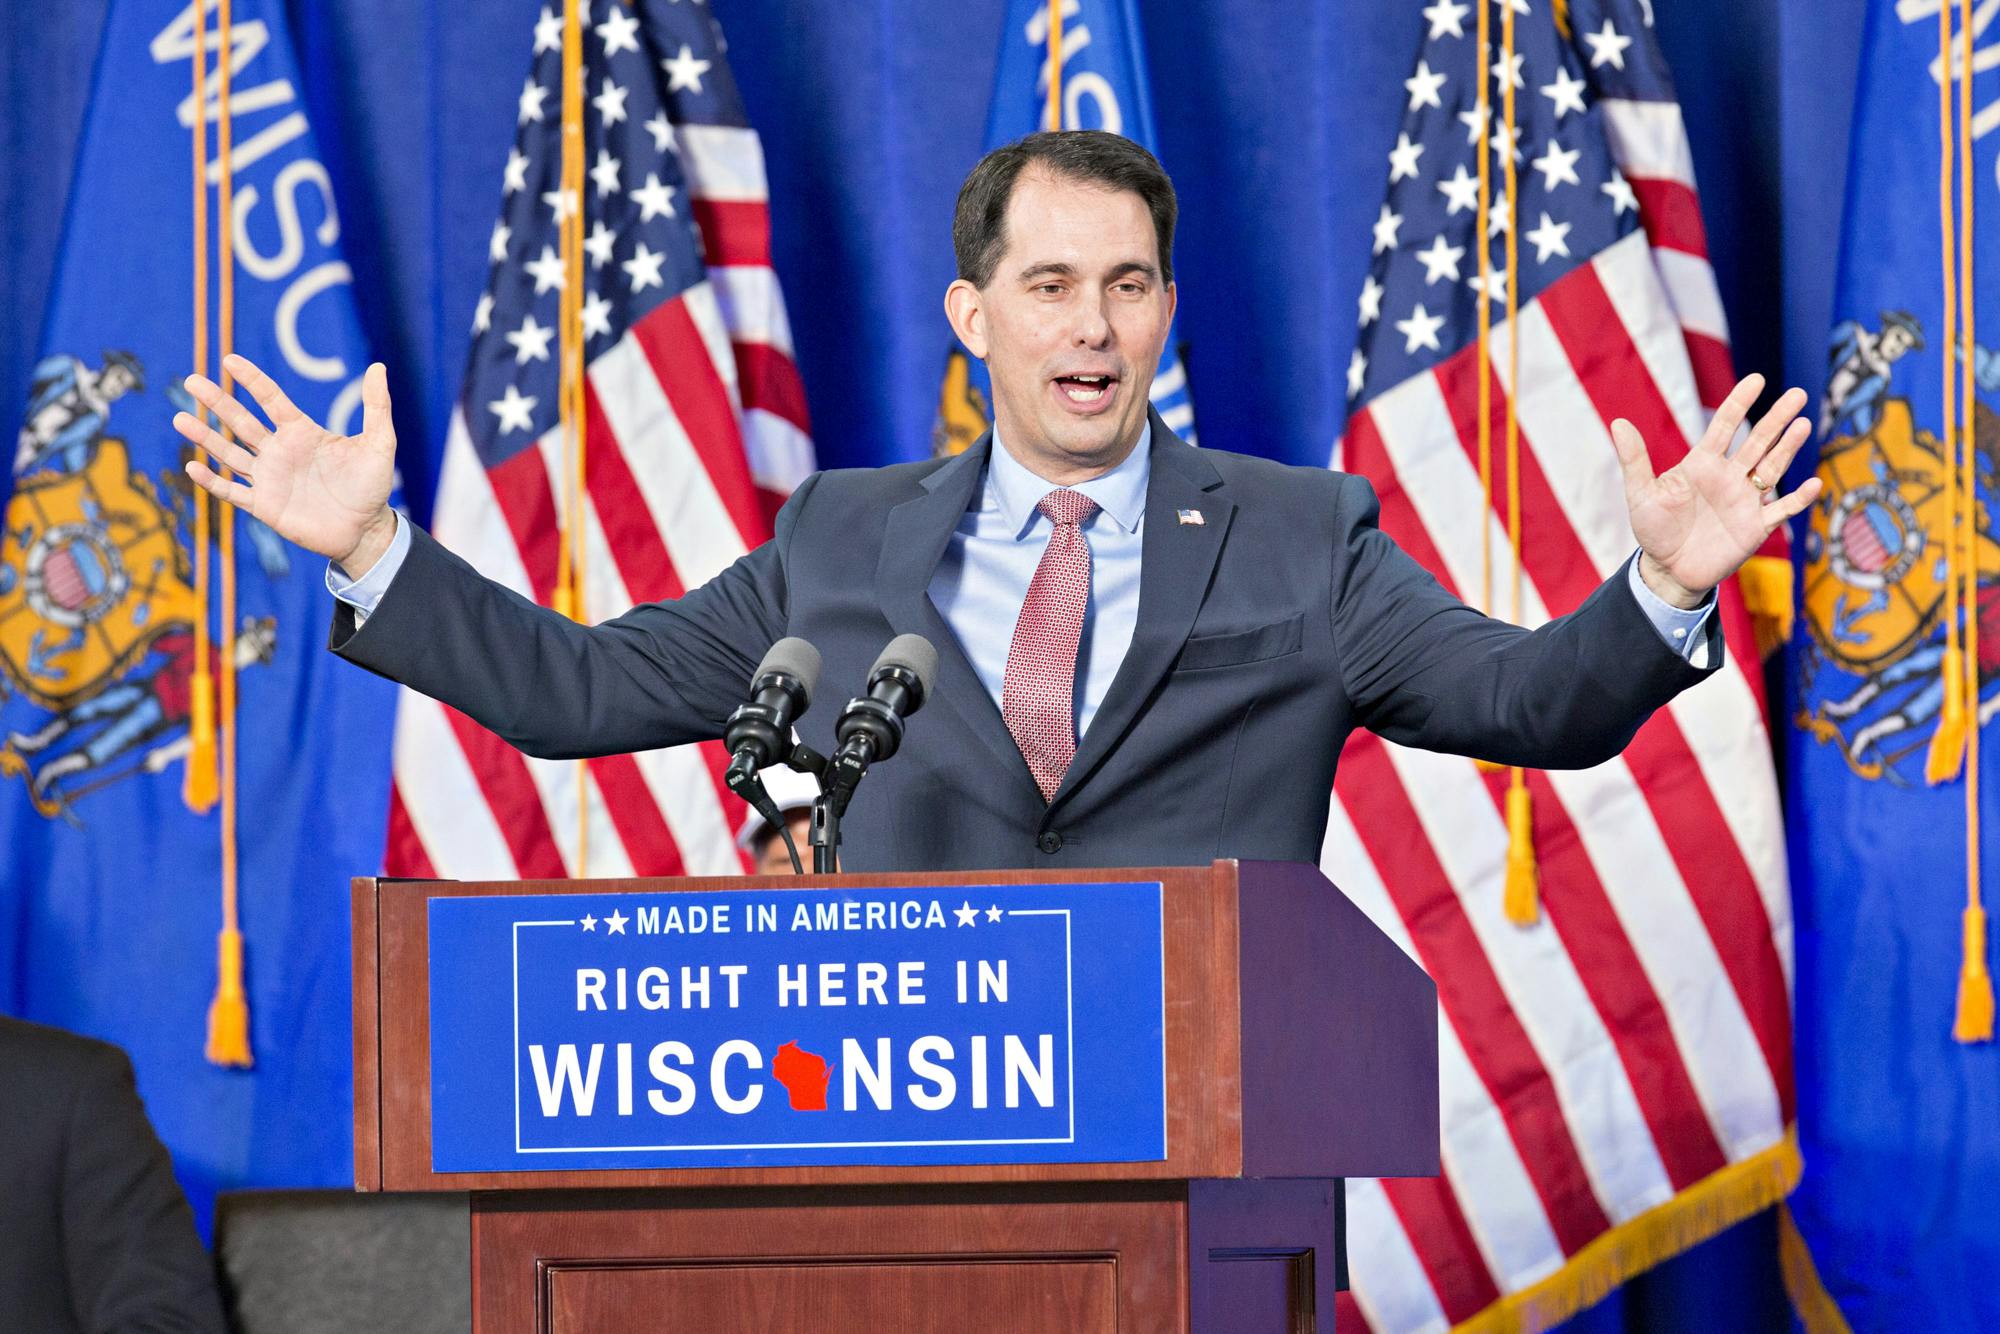 Wisconsins Gov. Scott Walker Wants To Drug Test People On Welfare 3 of 3 Wisconsins Governor wants to disqualify weed smokers from welfare